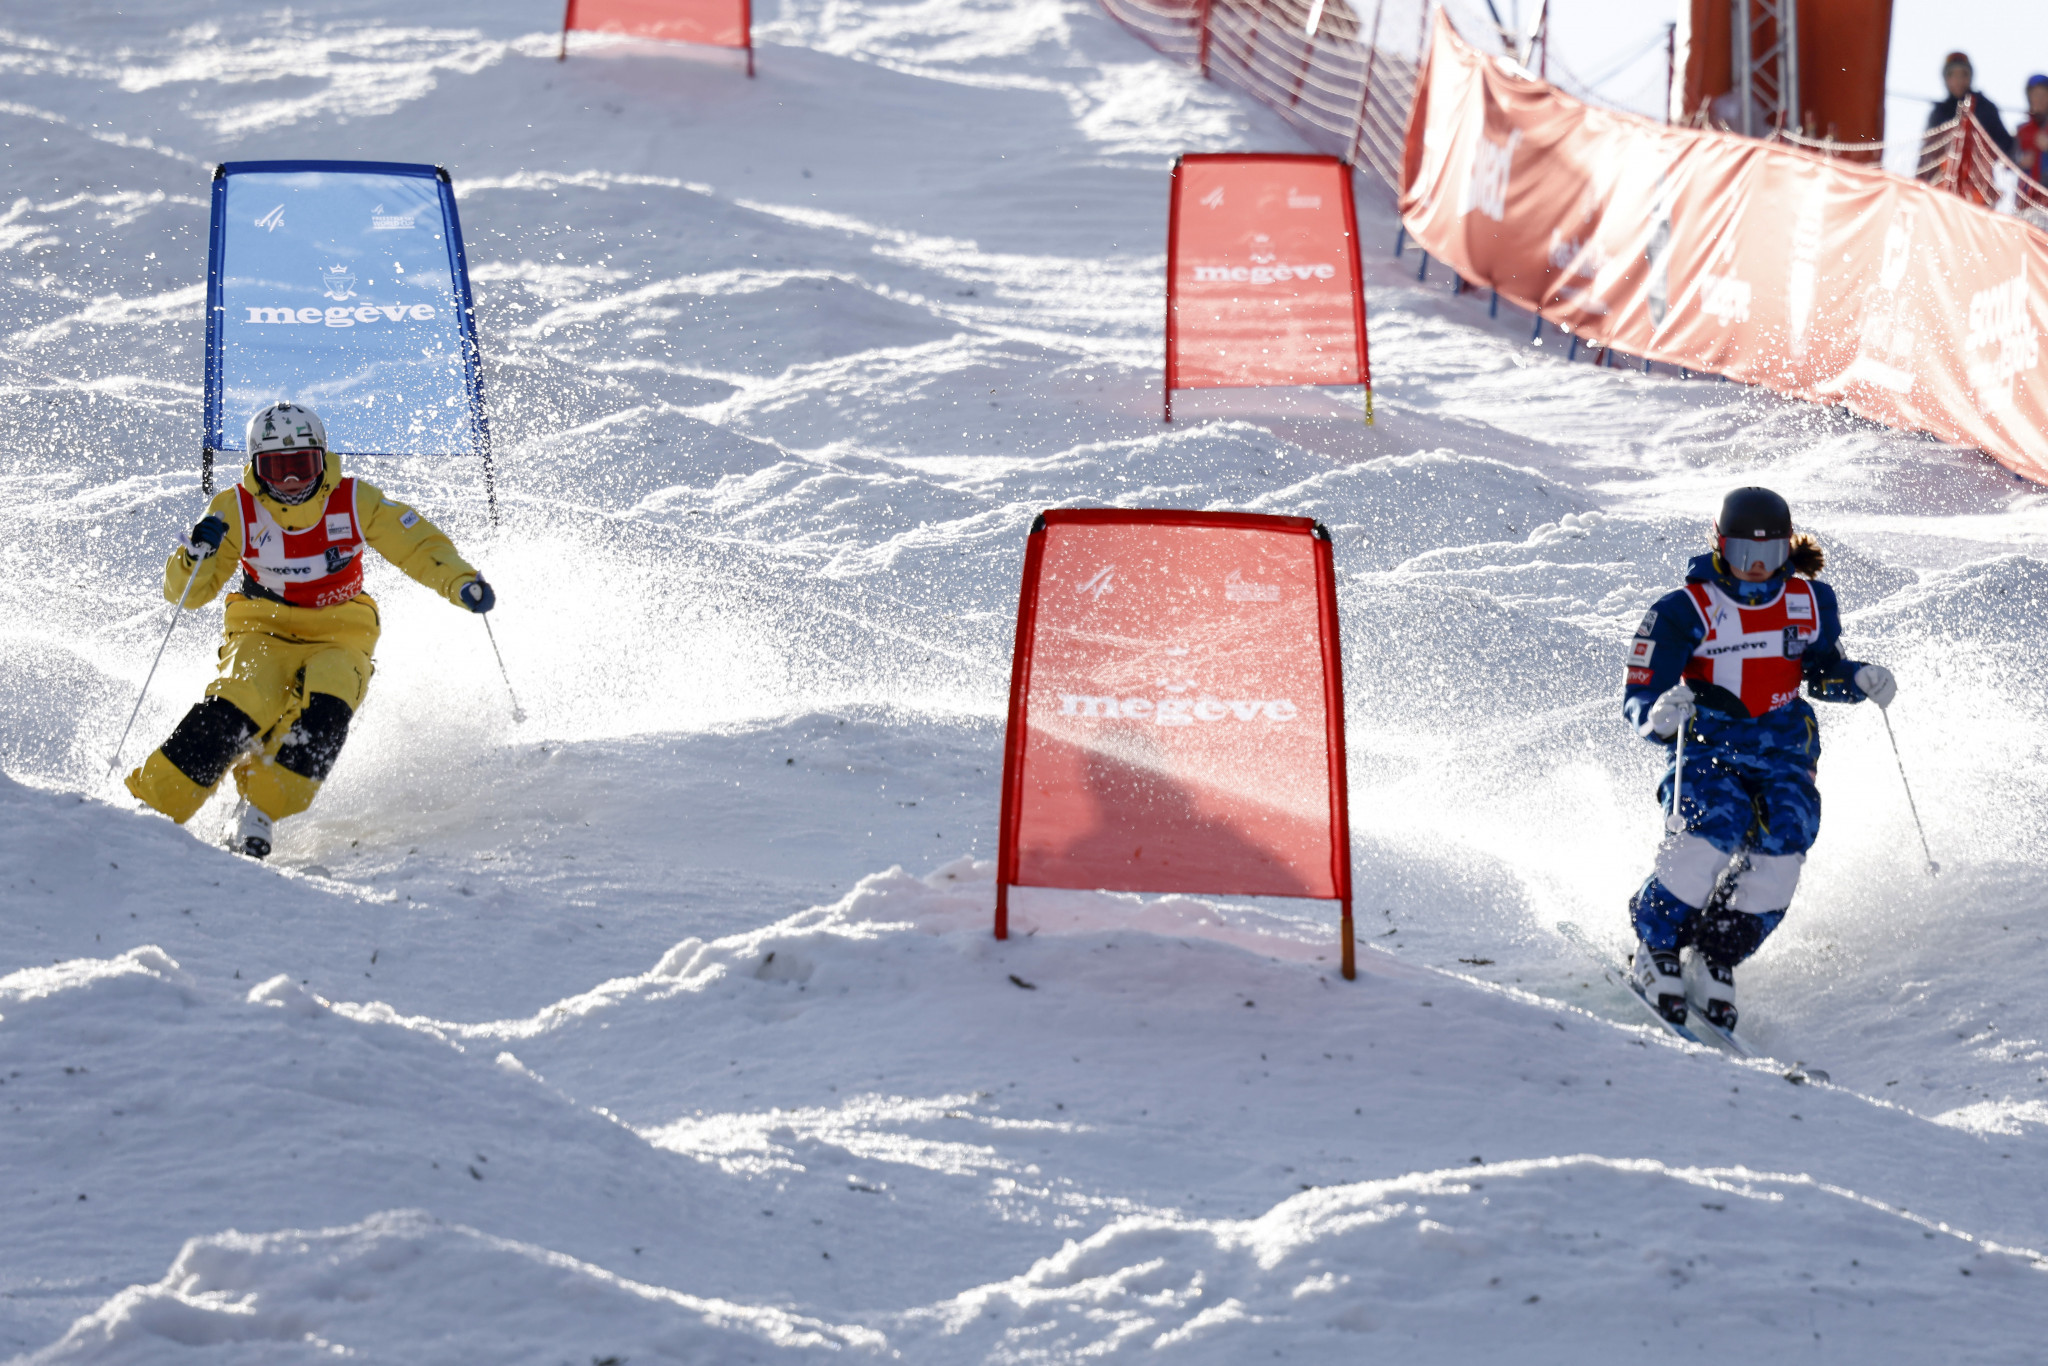 Athletes will go toe-to-toe for dual mogul medals in the Italian resort of Chiesa in Valmalenco ©Getty Images